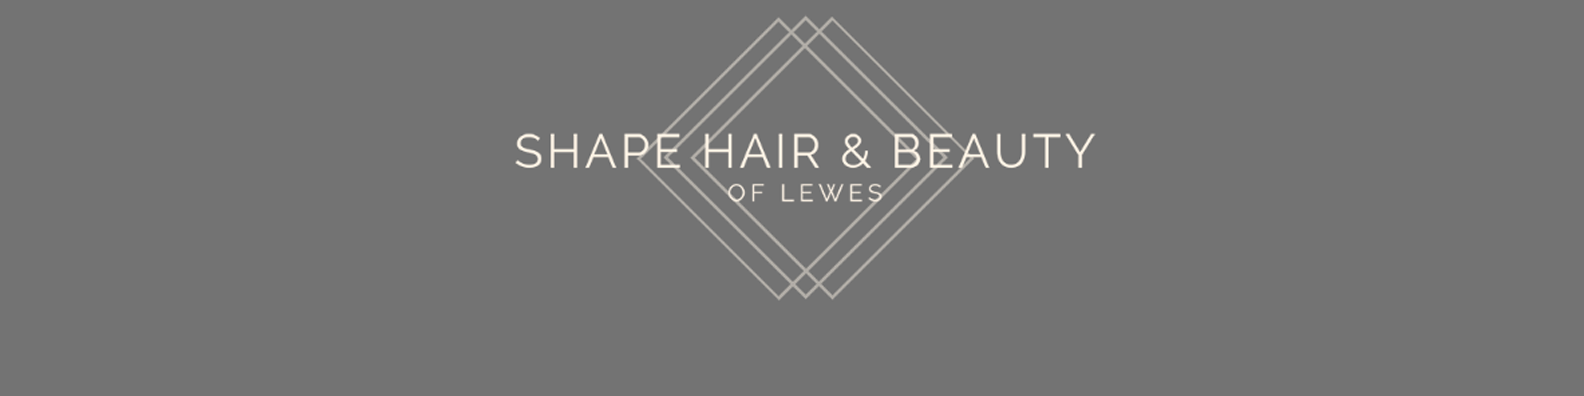 Logo of Shape Hair & Beauty Hair Salons In Lewes, East Sussex